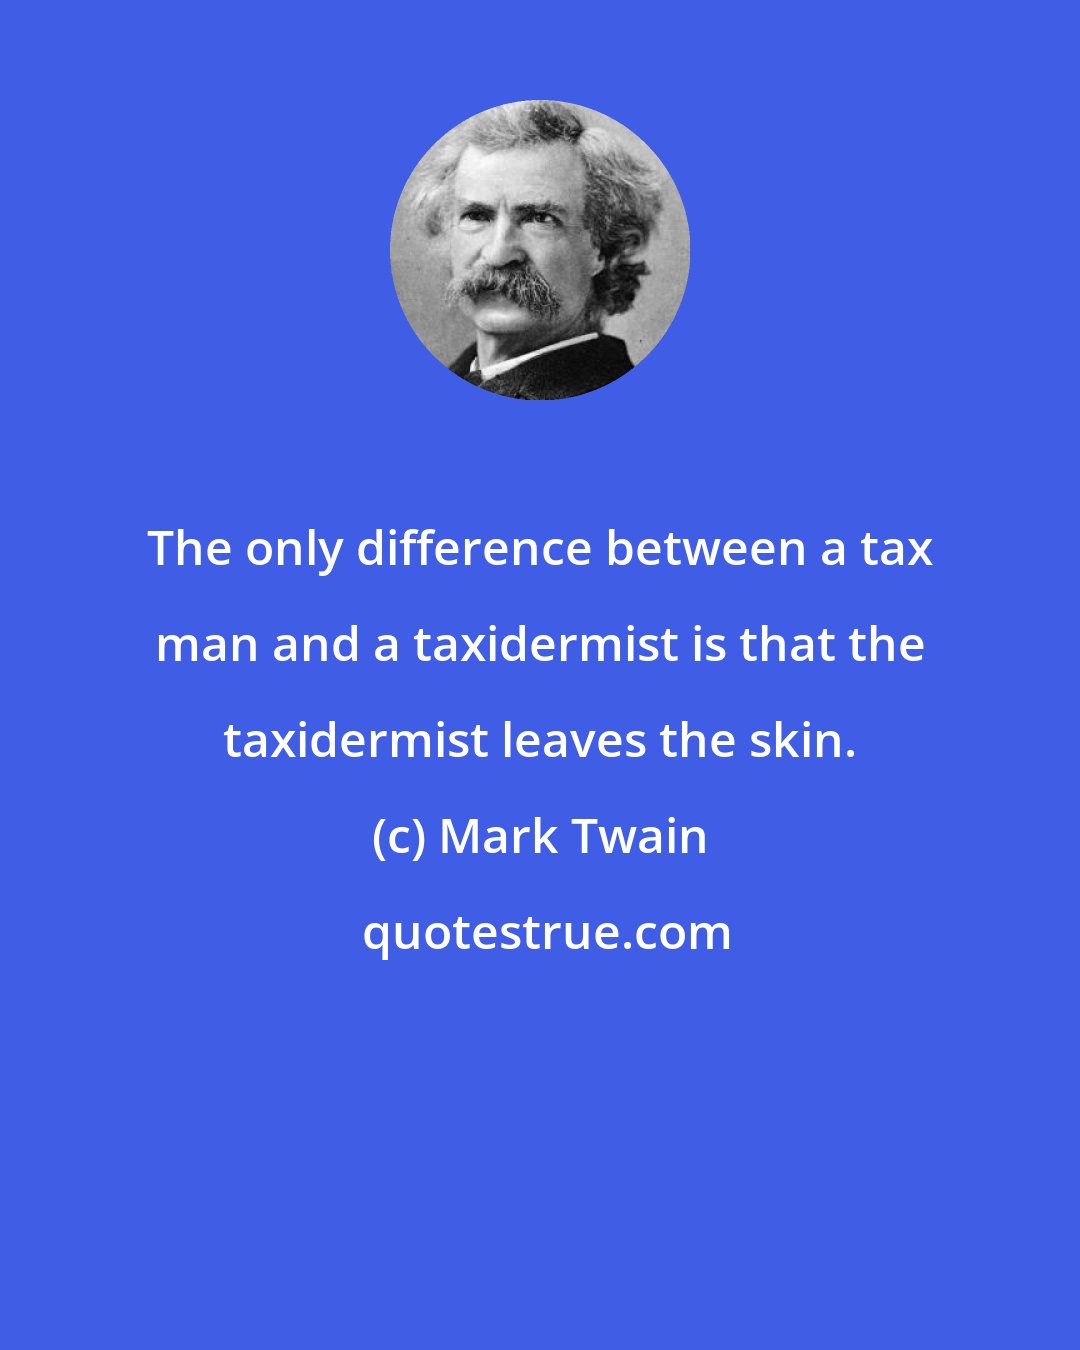 Mark Twain: The only difference between a tax man and a taxidermist is that the taxidermist leaves the skin.